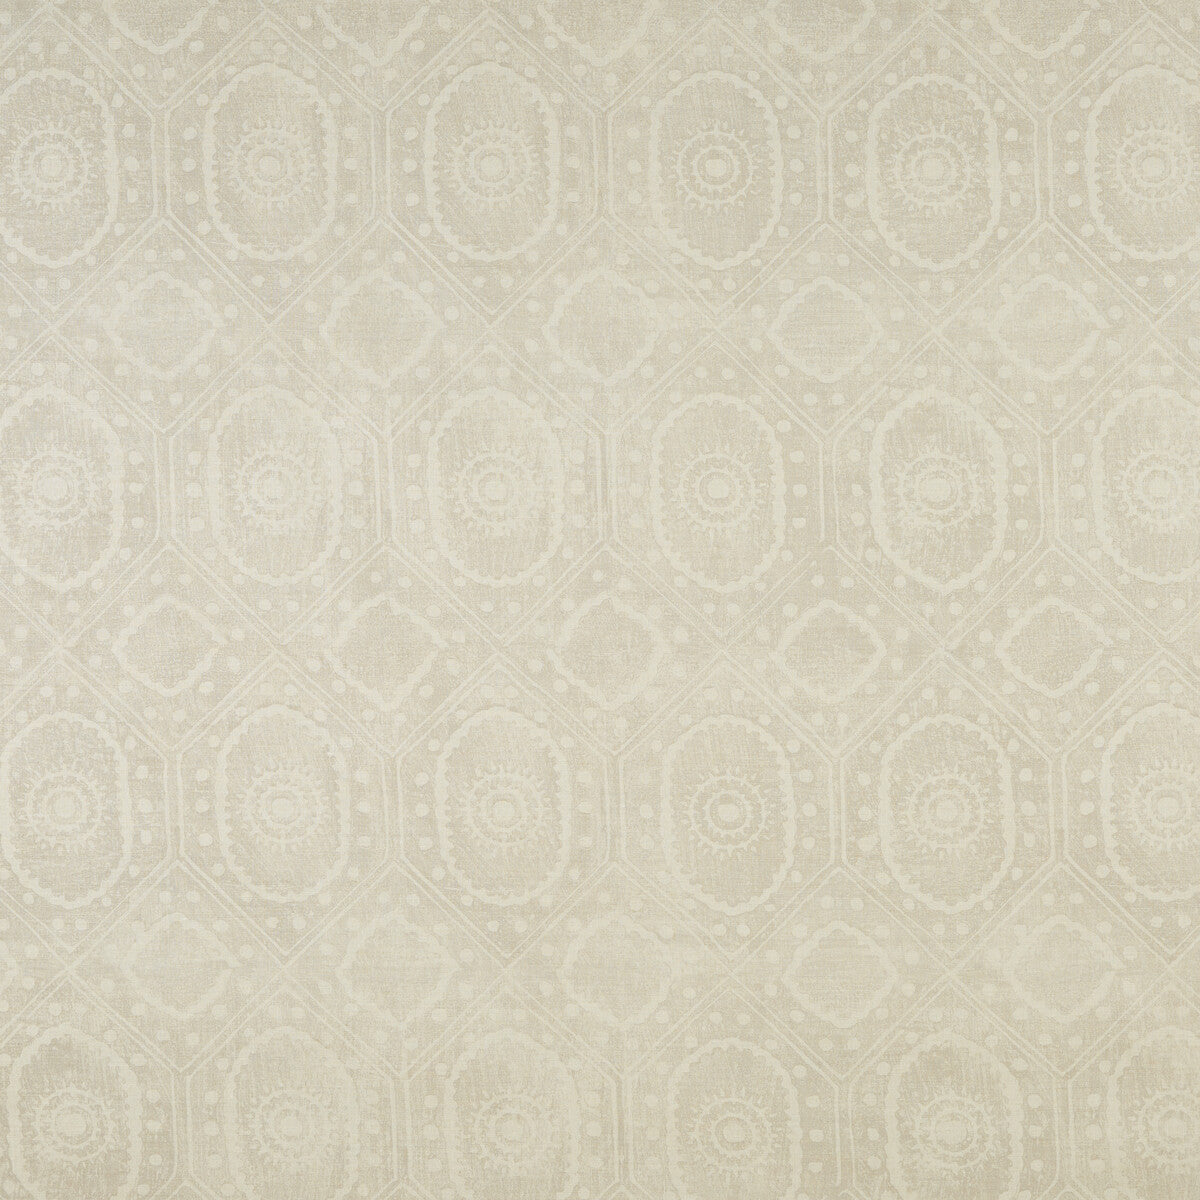 Diamond fabric in grey color - pattern BFC-3643.11.0 - by Lee Jofa in the Blithfield collection